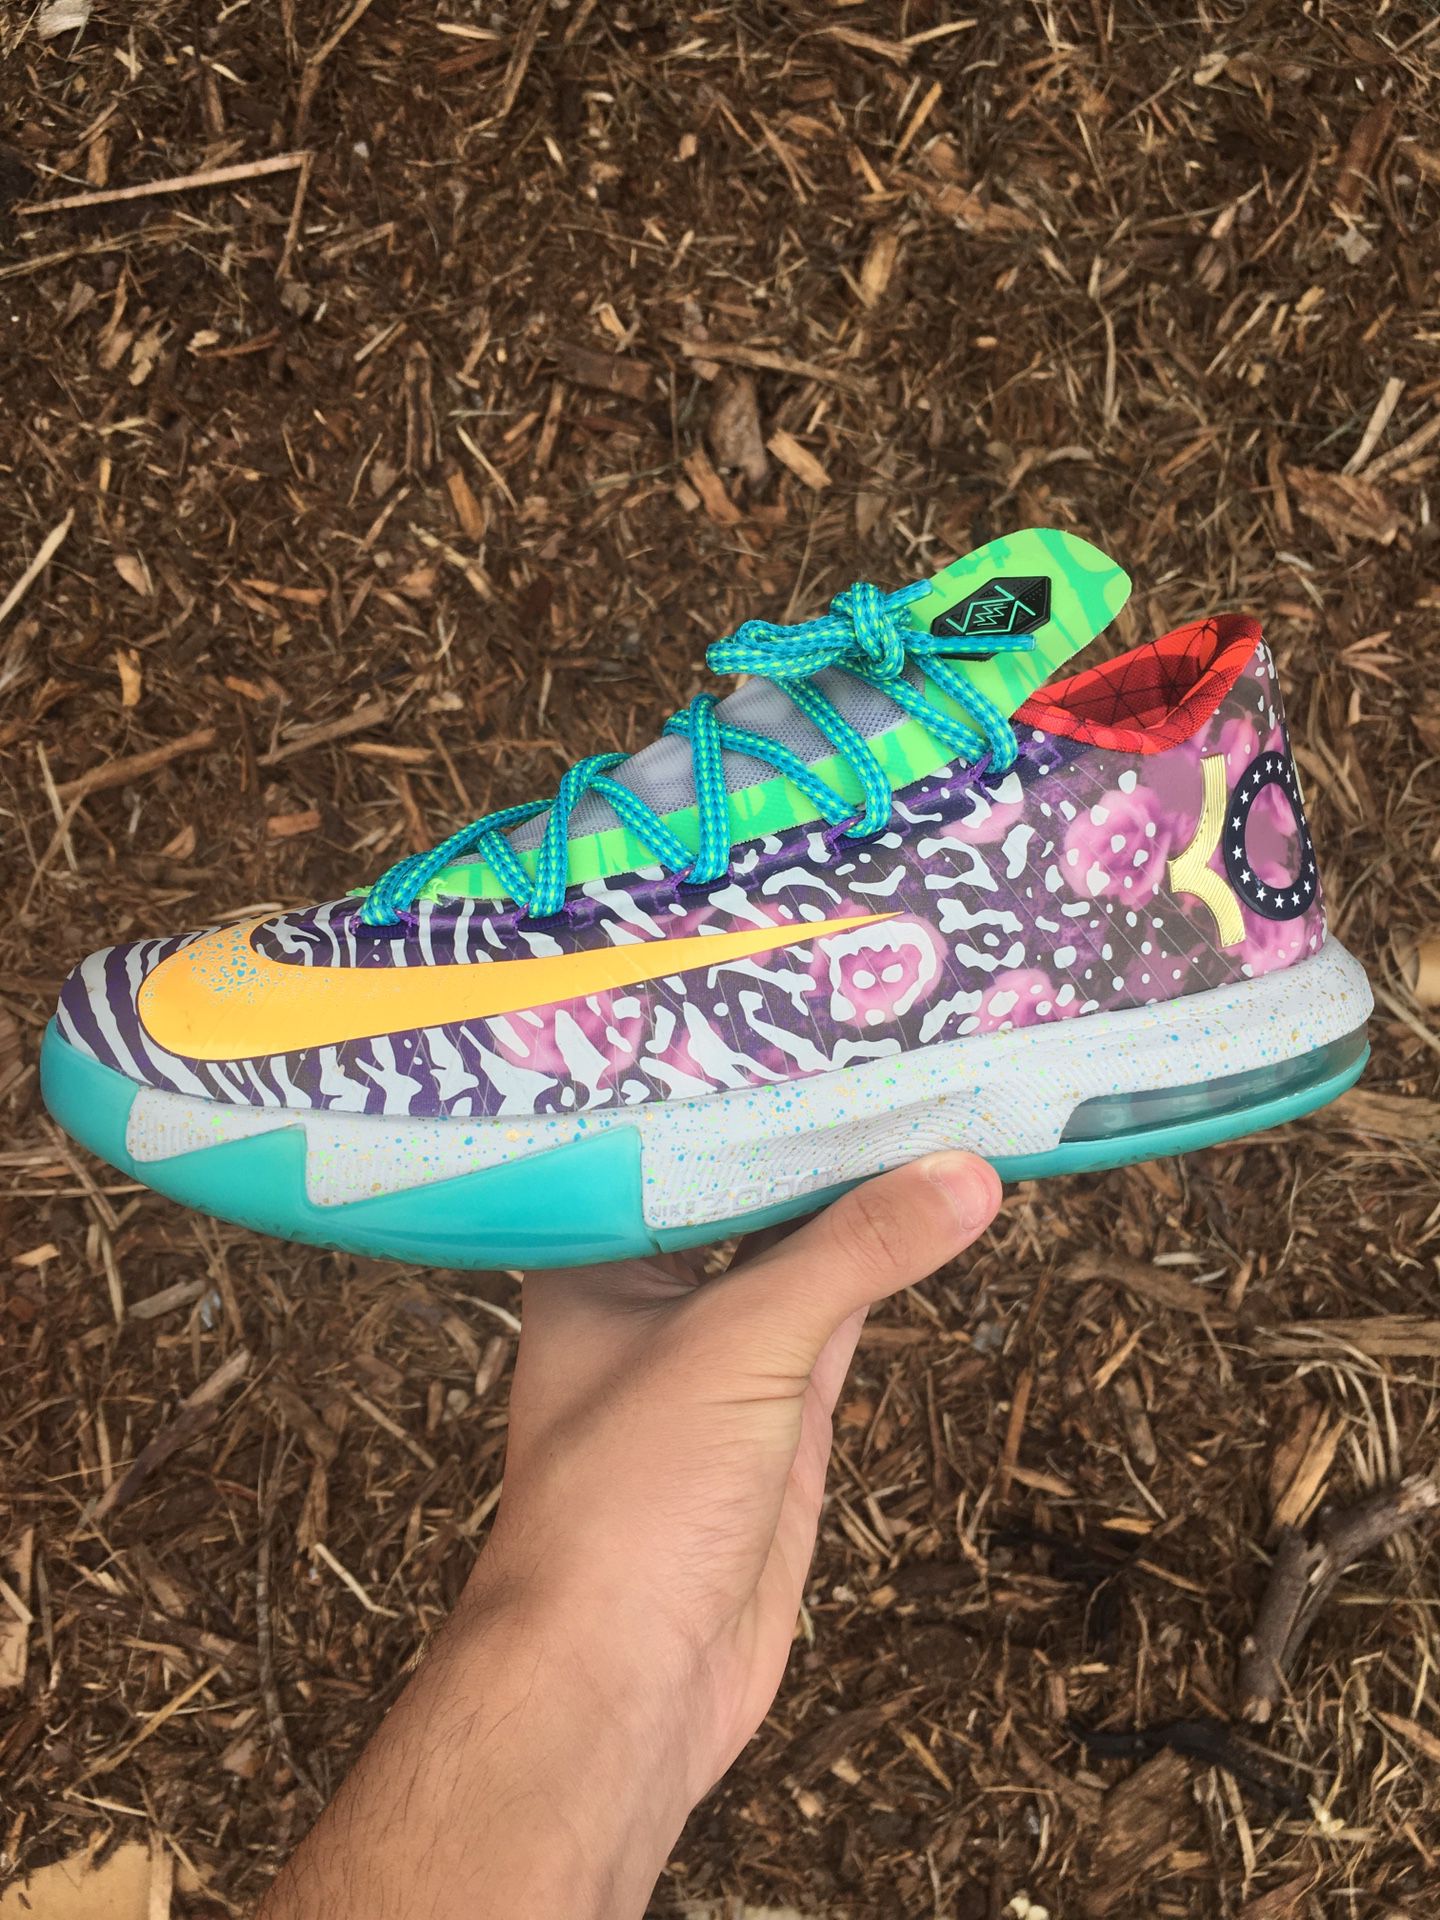 Nike KD 6 “what the” Size 8.5